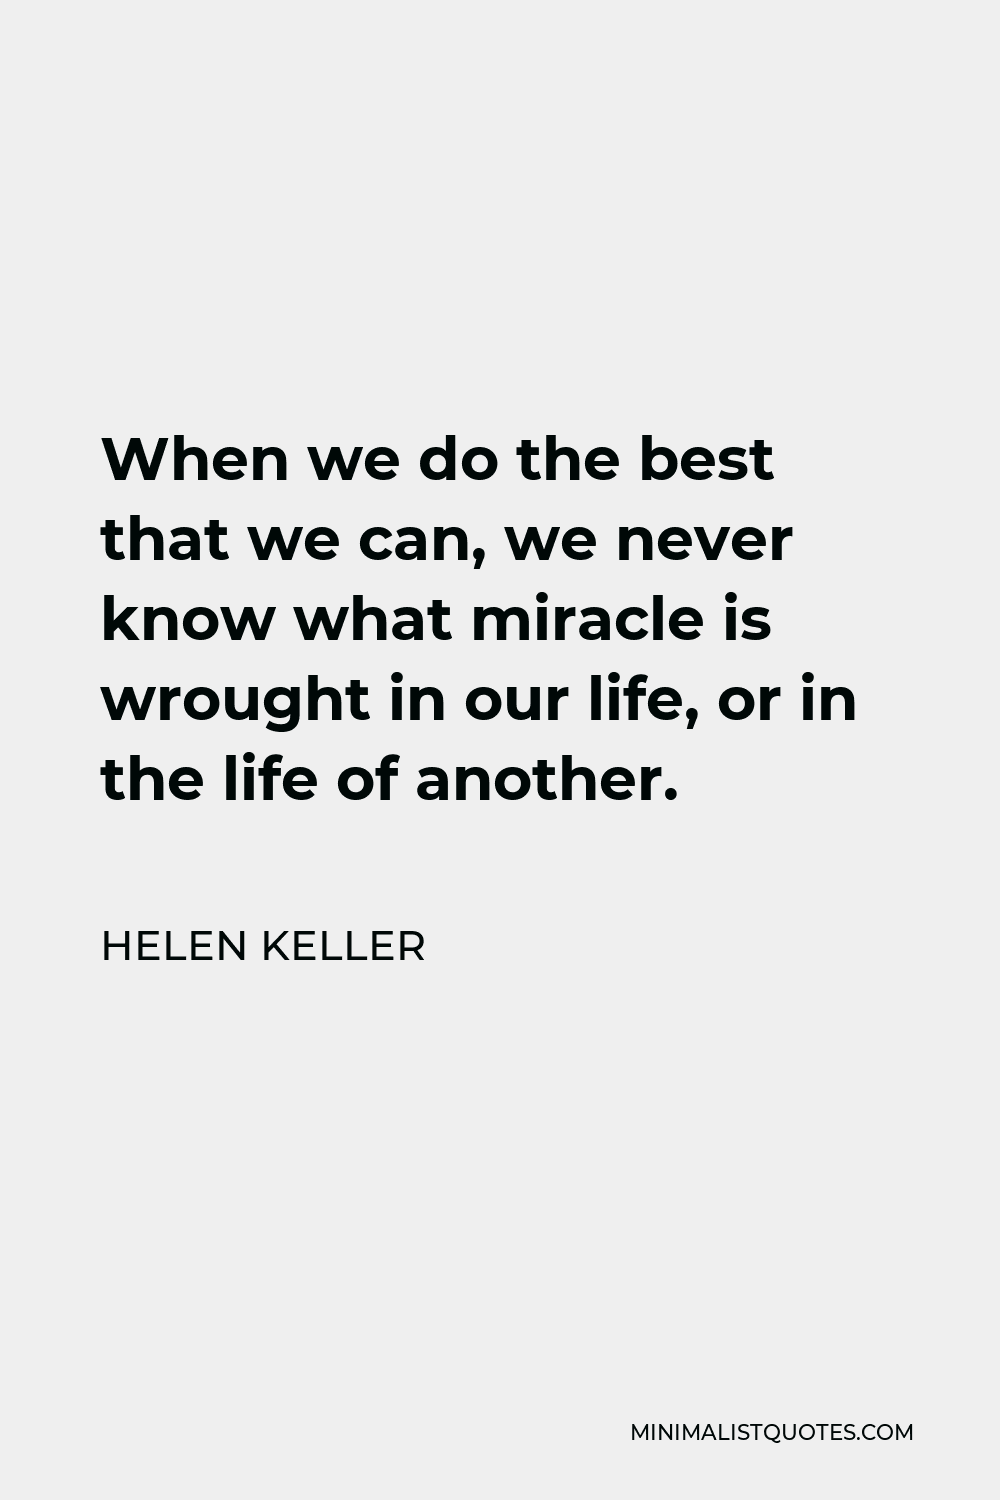 Helen Keller Quote - When we do the best that we can, we never know what miracle is wrought in our life, or in the life of another.